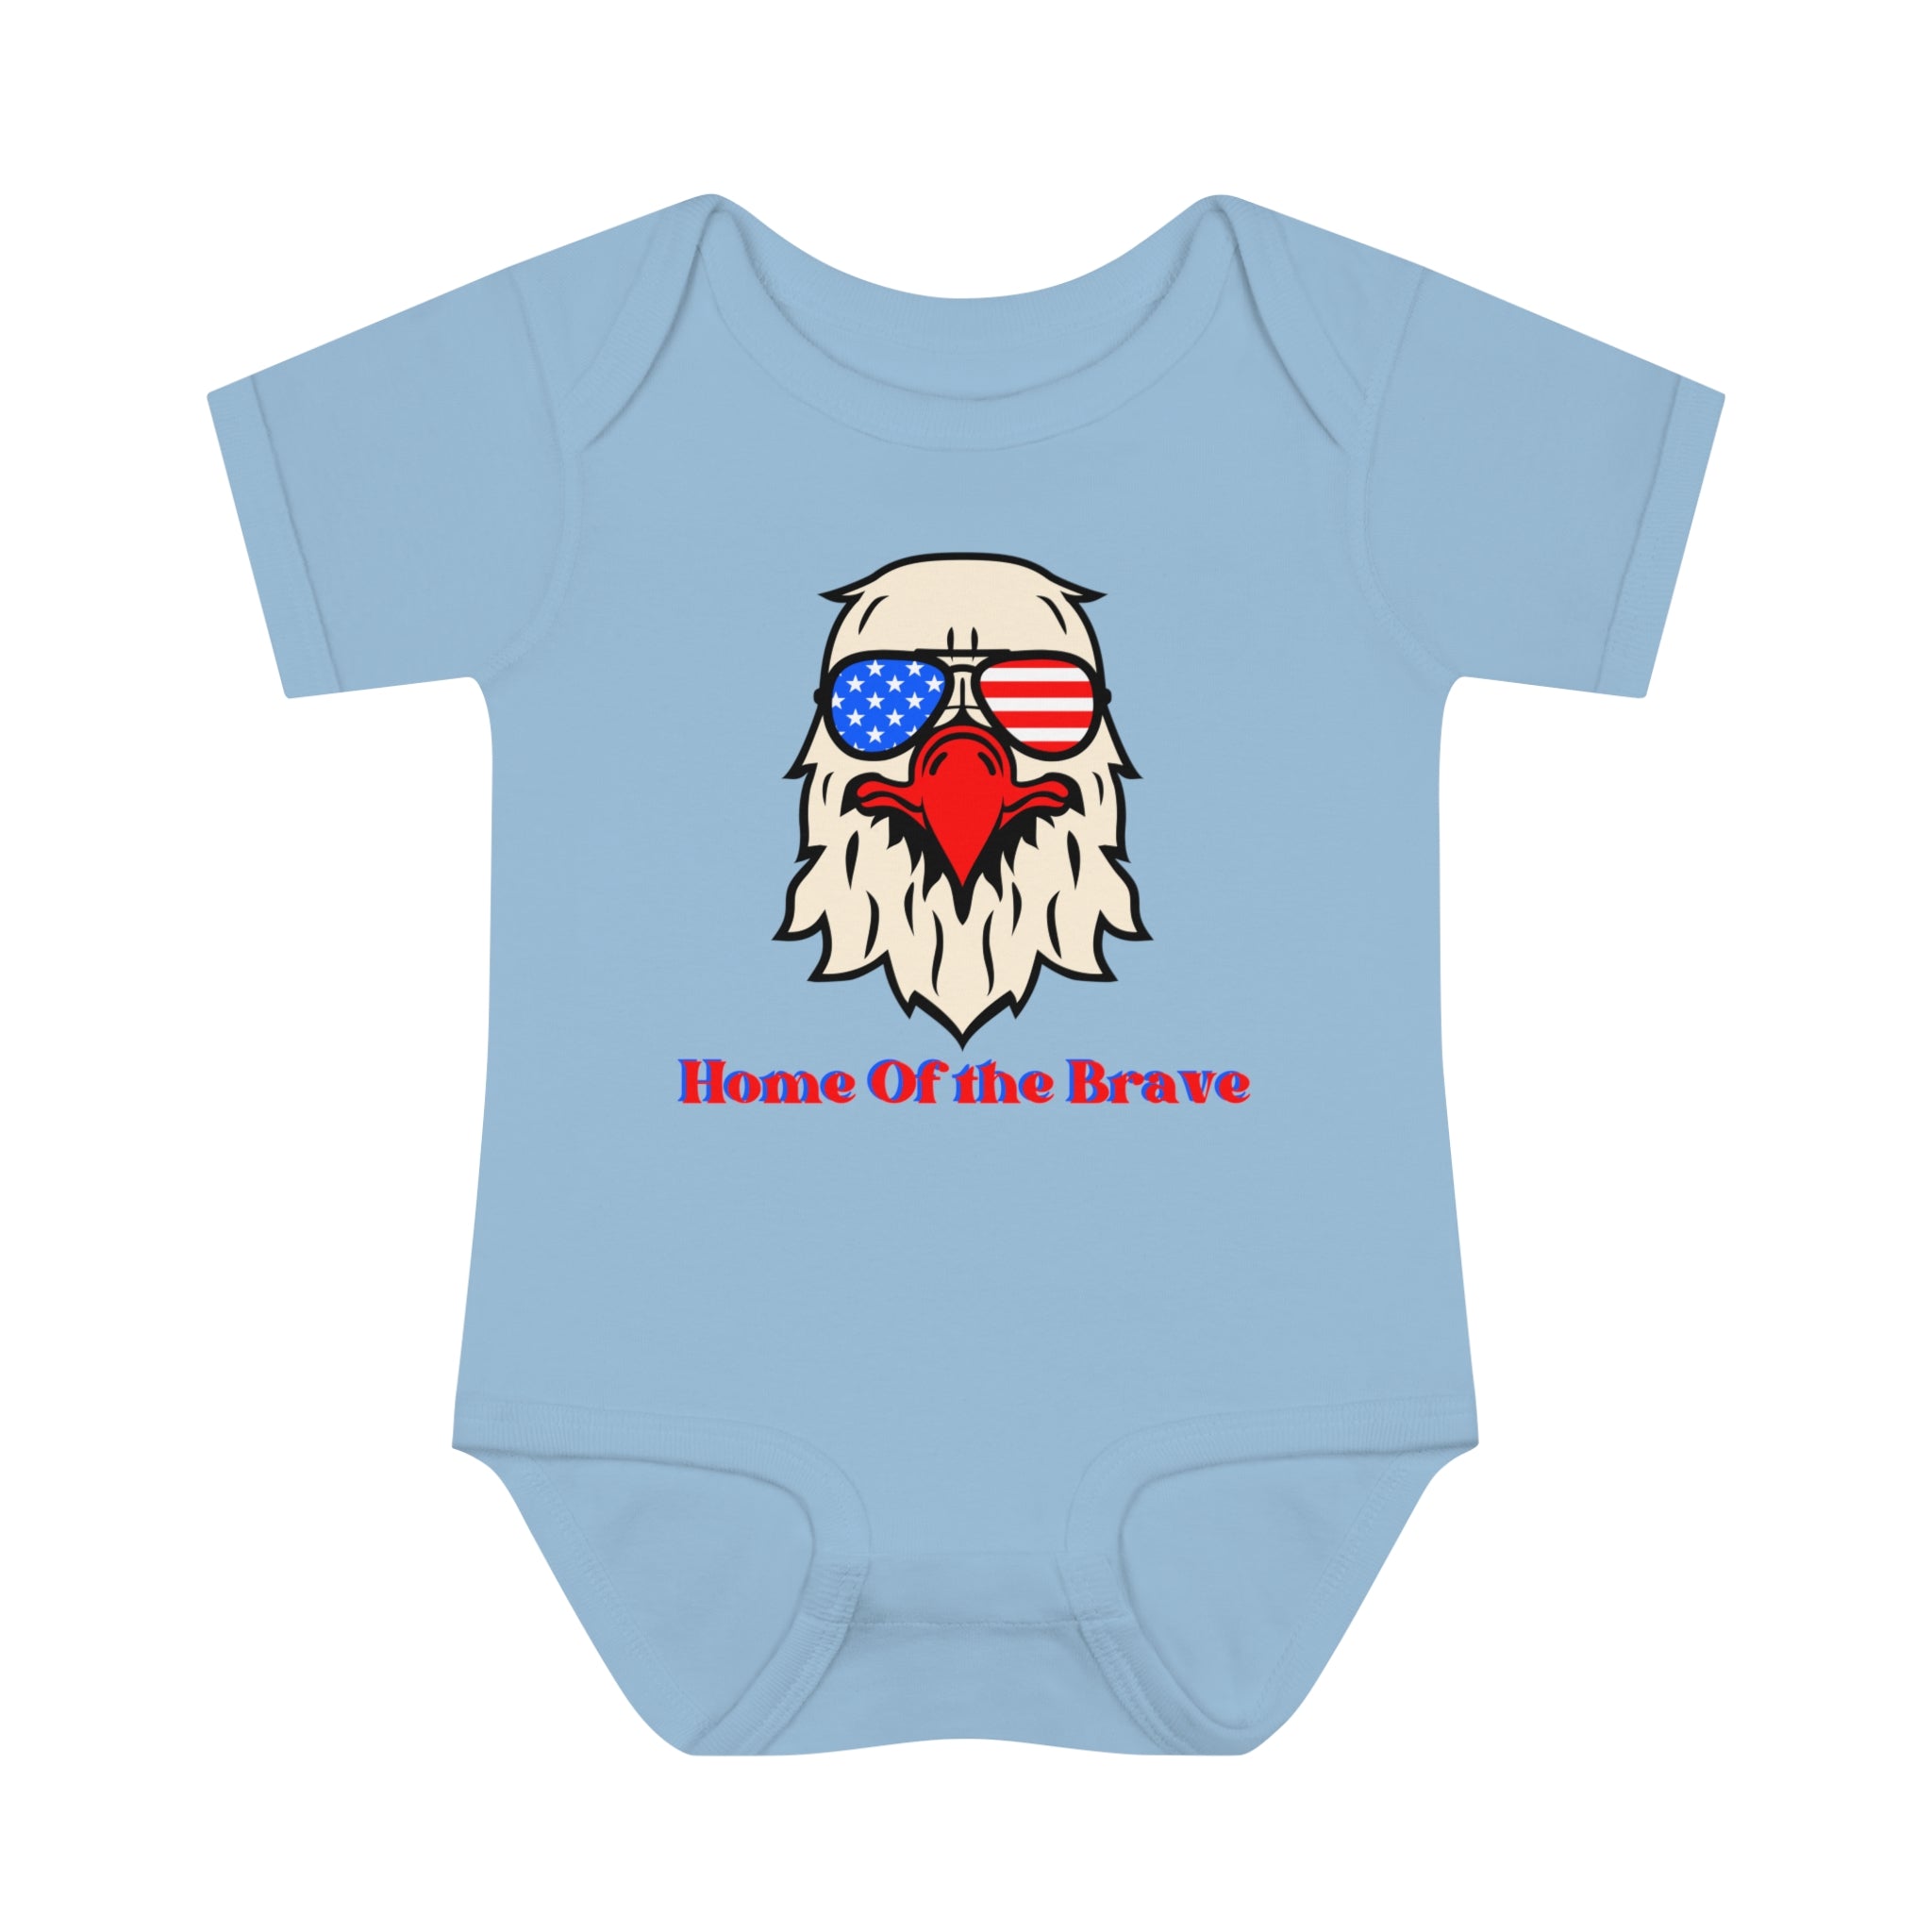 Home of the brave Baby Bodysuit